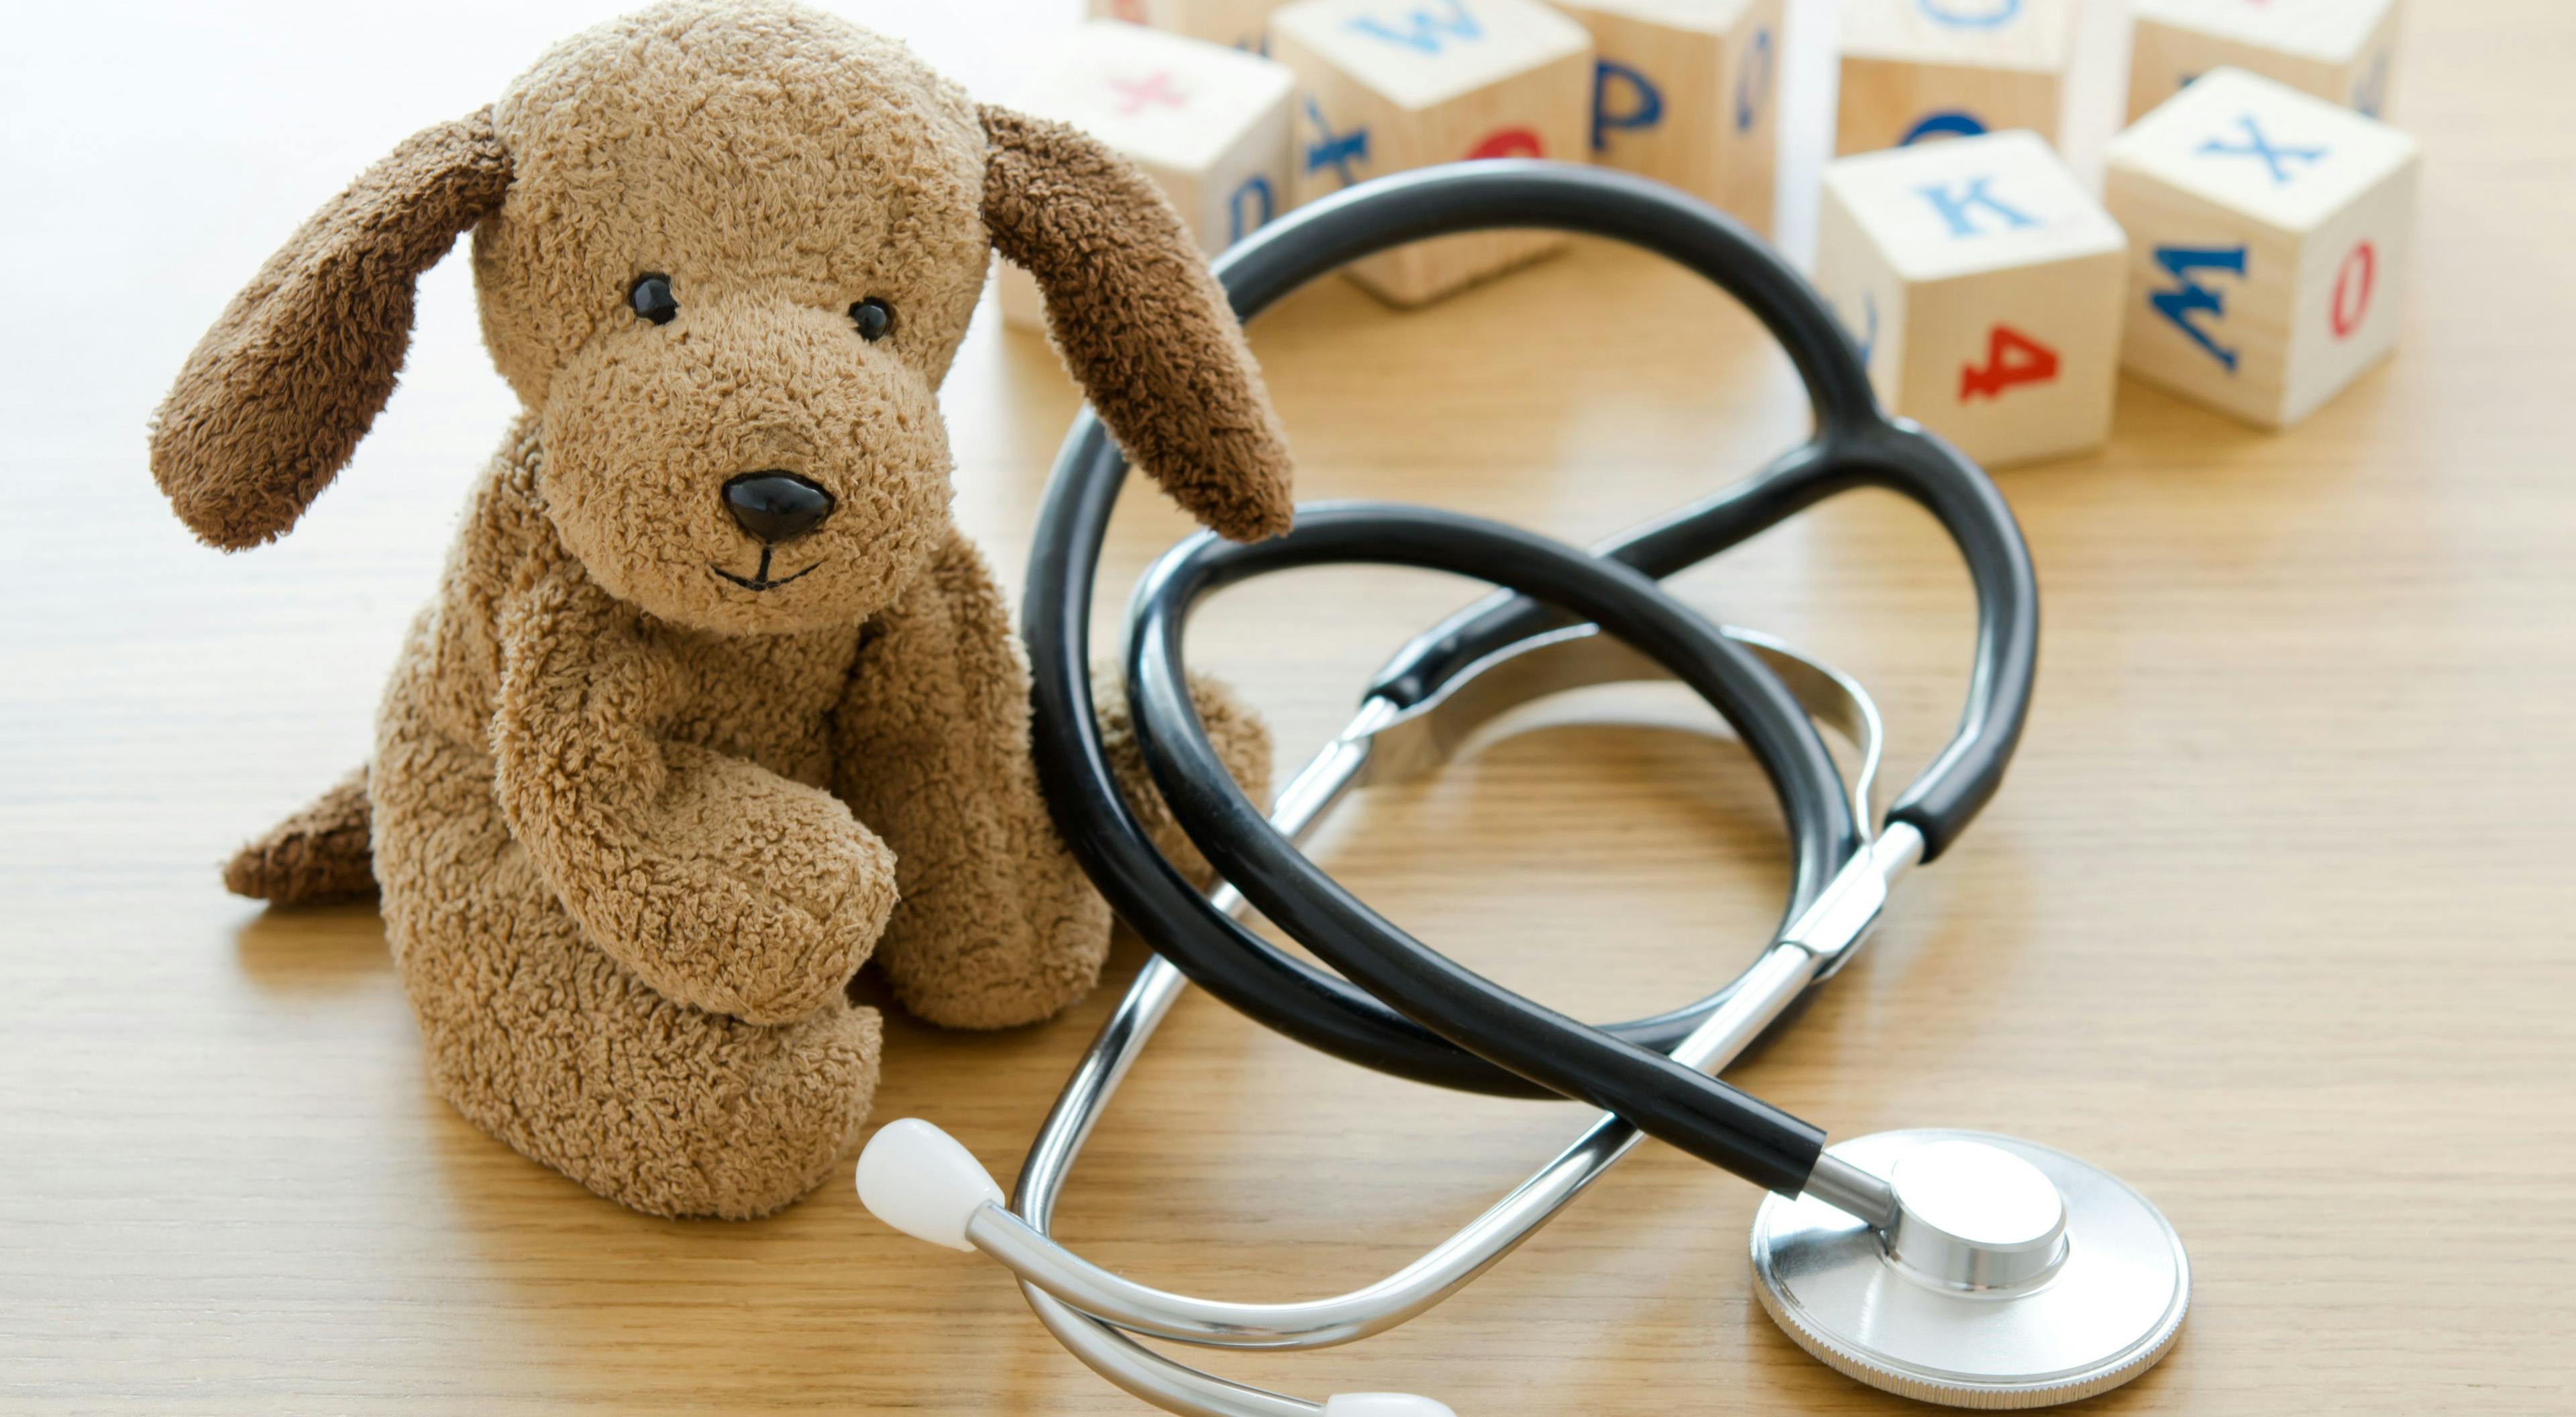 Childhood Pneumonia May Be Associated With Cancer Risk